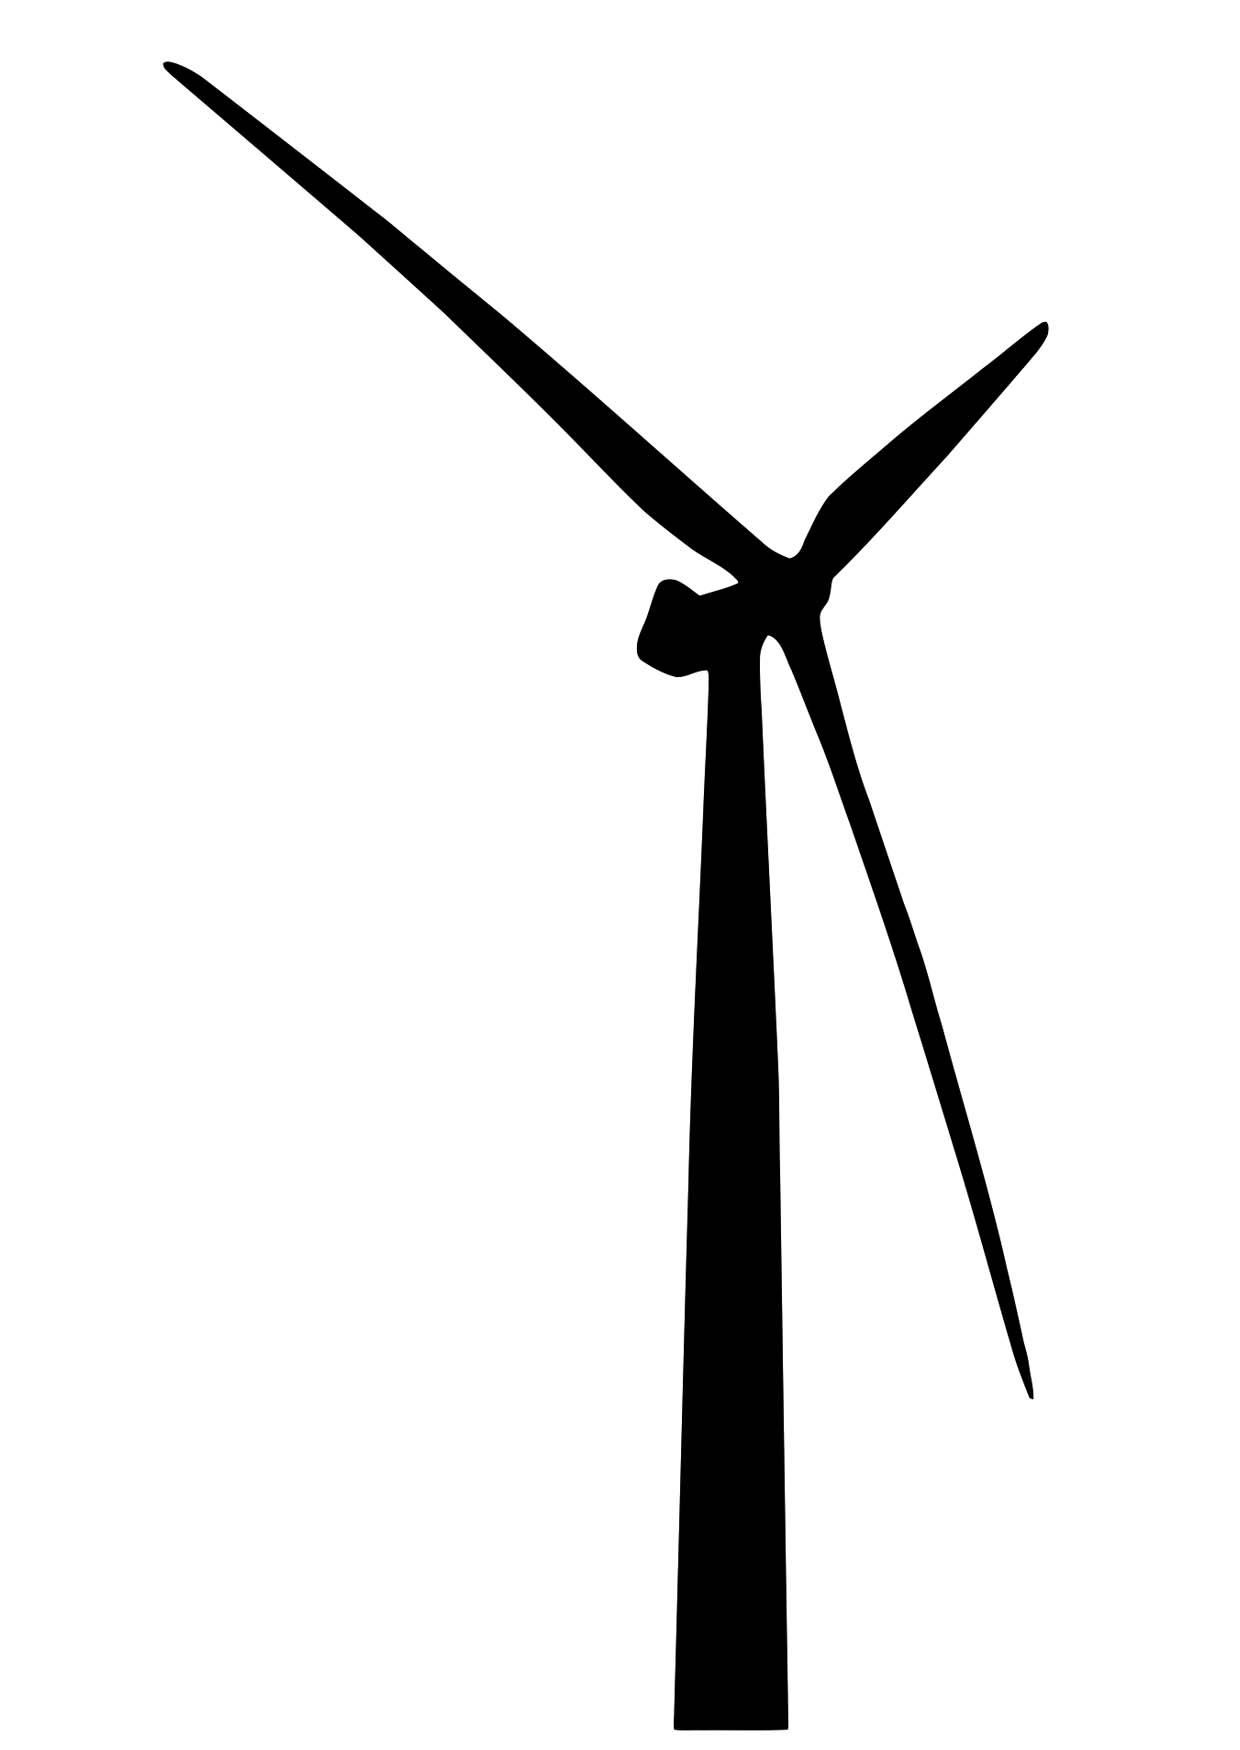 Coloring page wind turbine